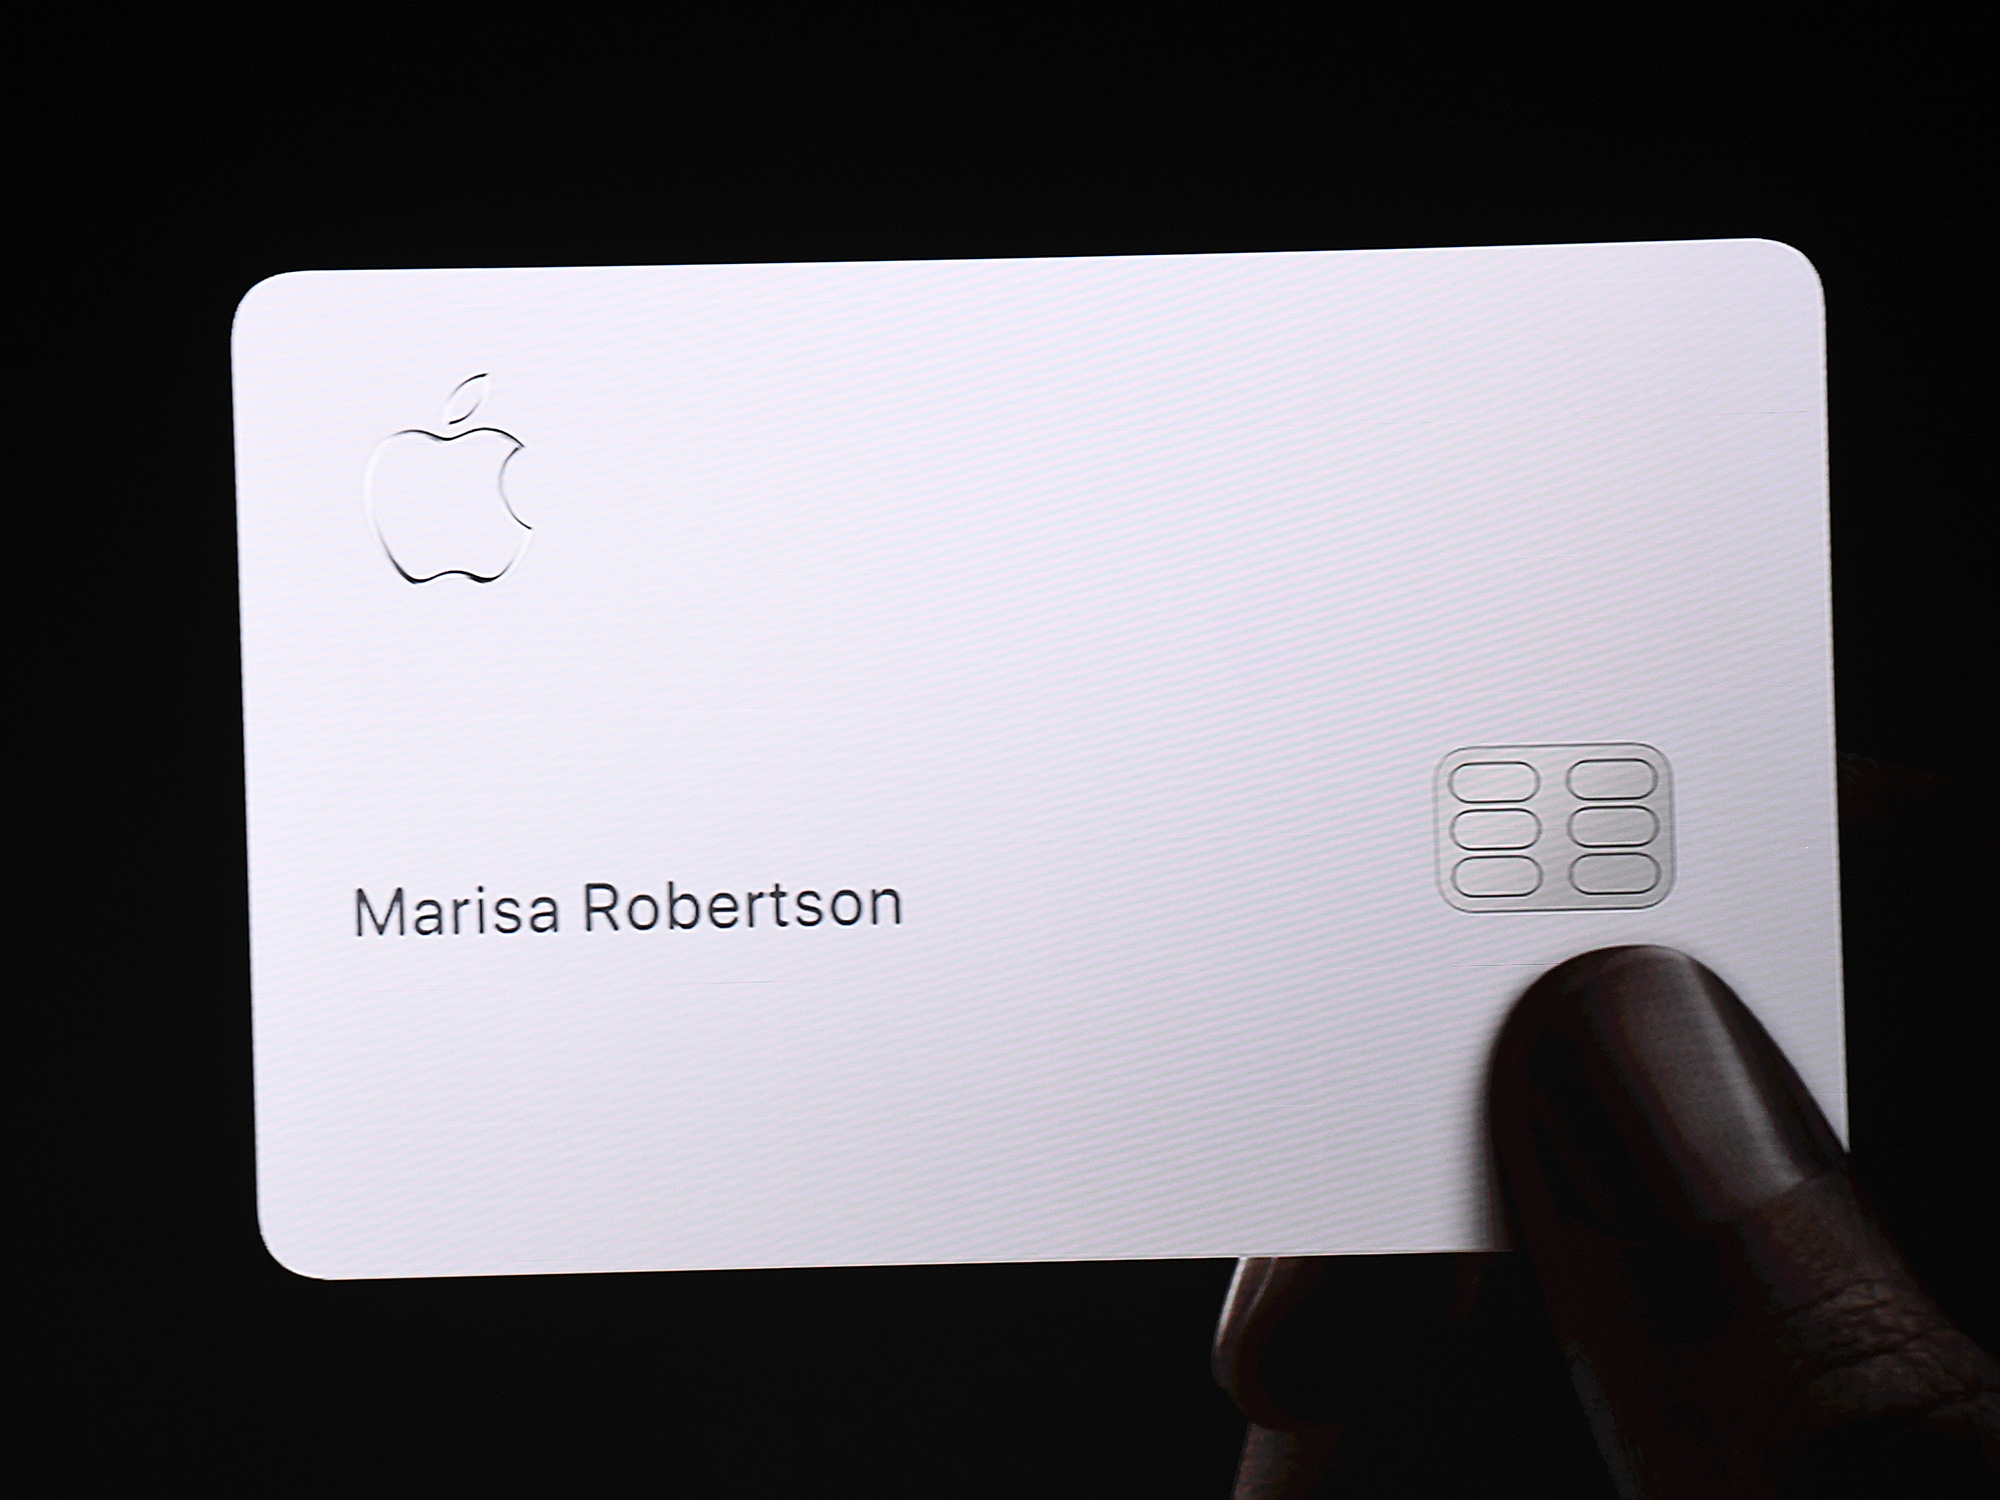 New Apple Goldman Sachs Credit Card Now Available to Thousands Bloomberg